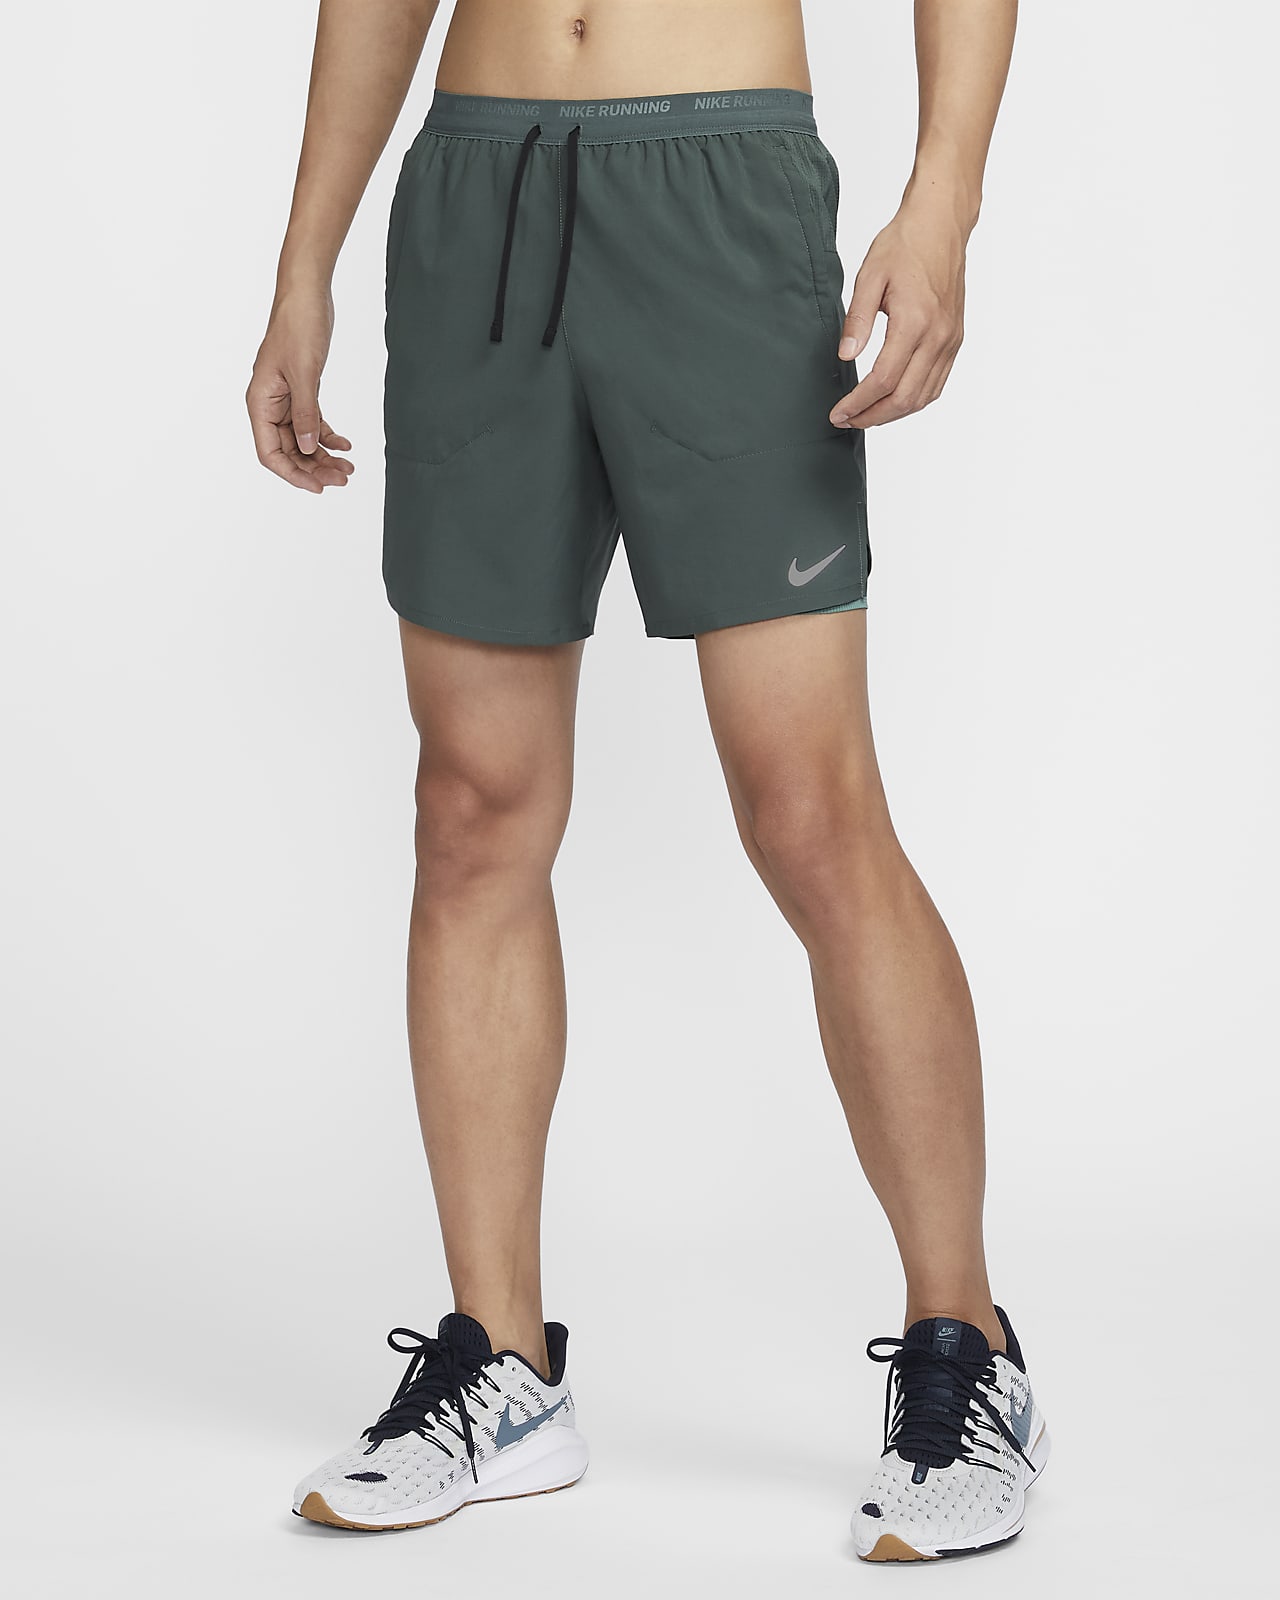 Nike Dri-FIT Stride Men's 18cm (approx.) 2-In-1 Running Shorts